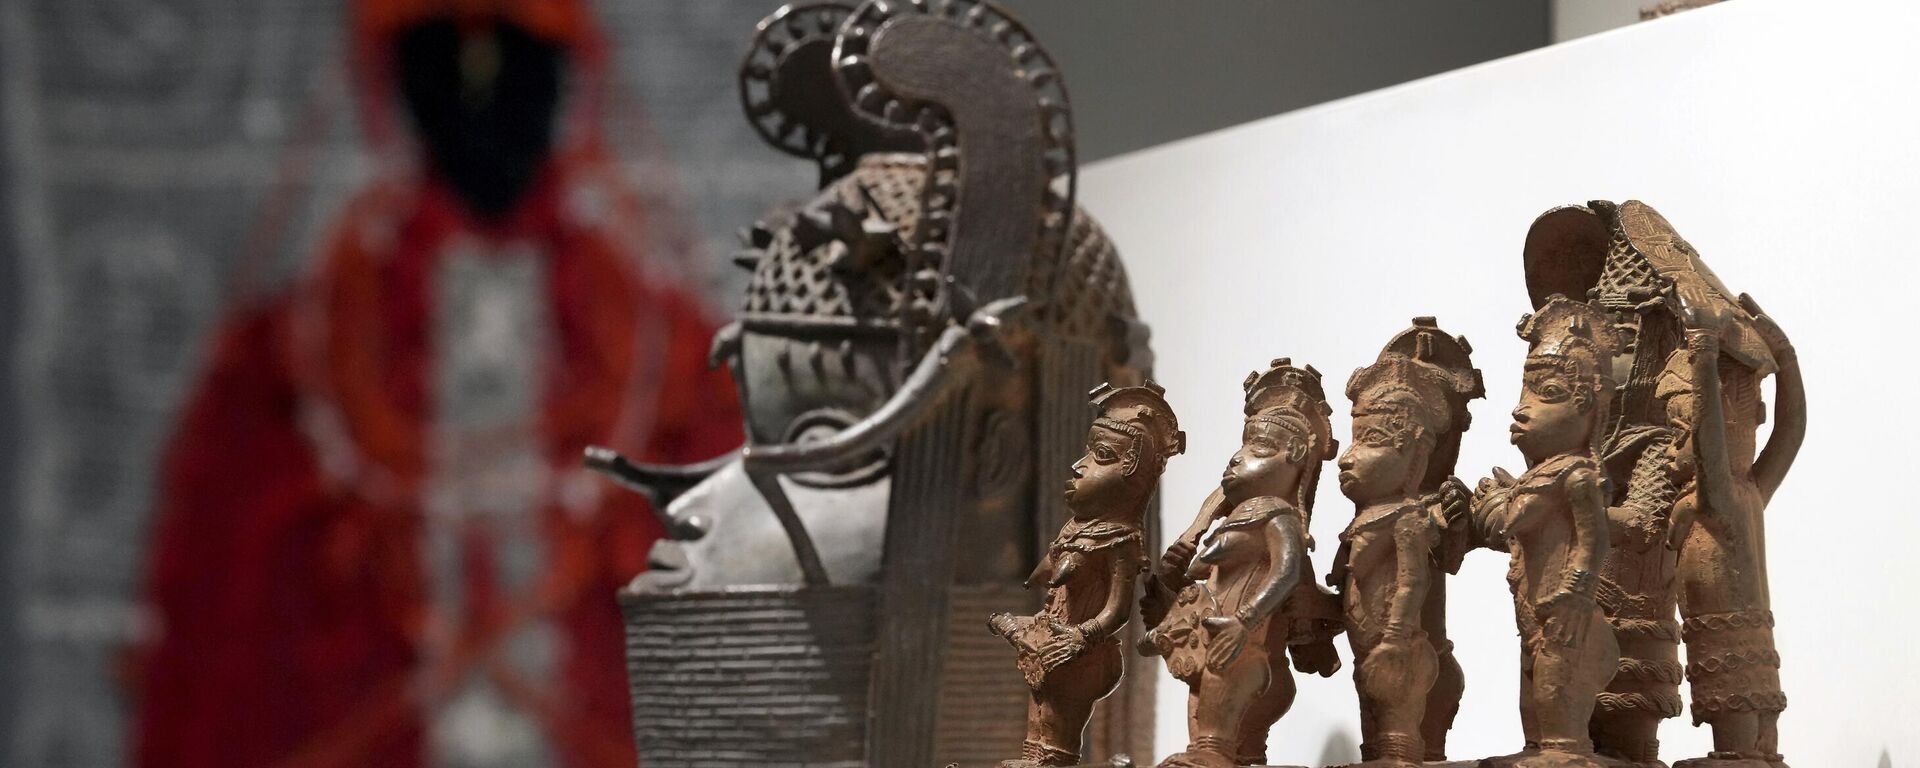 Benin Bronzes, that were stolen from Africa during colonial times, are displayed in Berlin, Germany, Thursday, Sept. 15, 2022 - Sputnik International, 1920, 19.12.2022